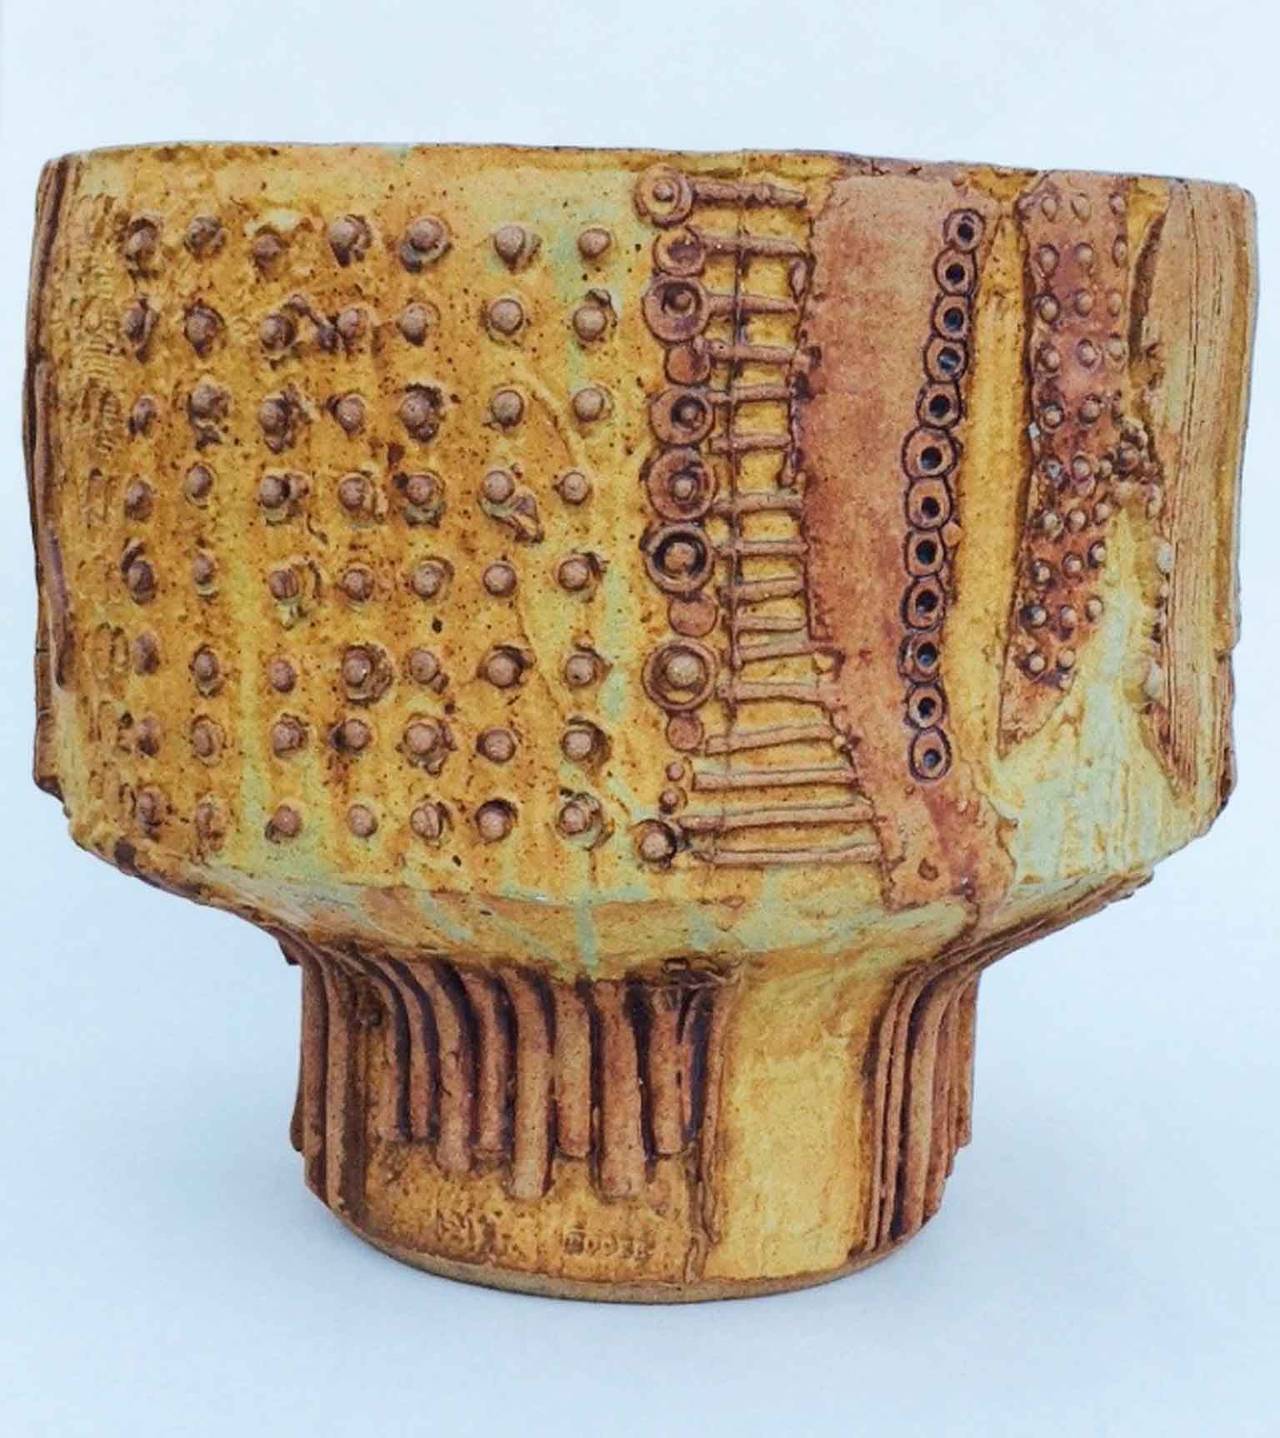 A fine and rare Bernard Rooke ceramic architectural planter. Large signed item presents excellent design and execution. A early and rare example appropriate for any collection or archive. Excellent with no issues.